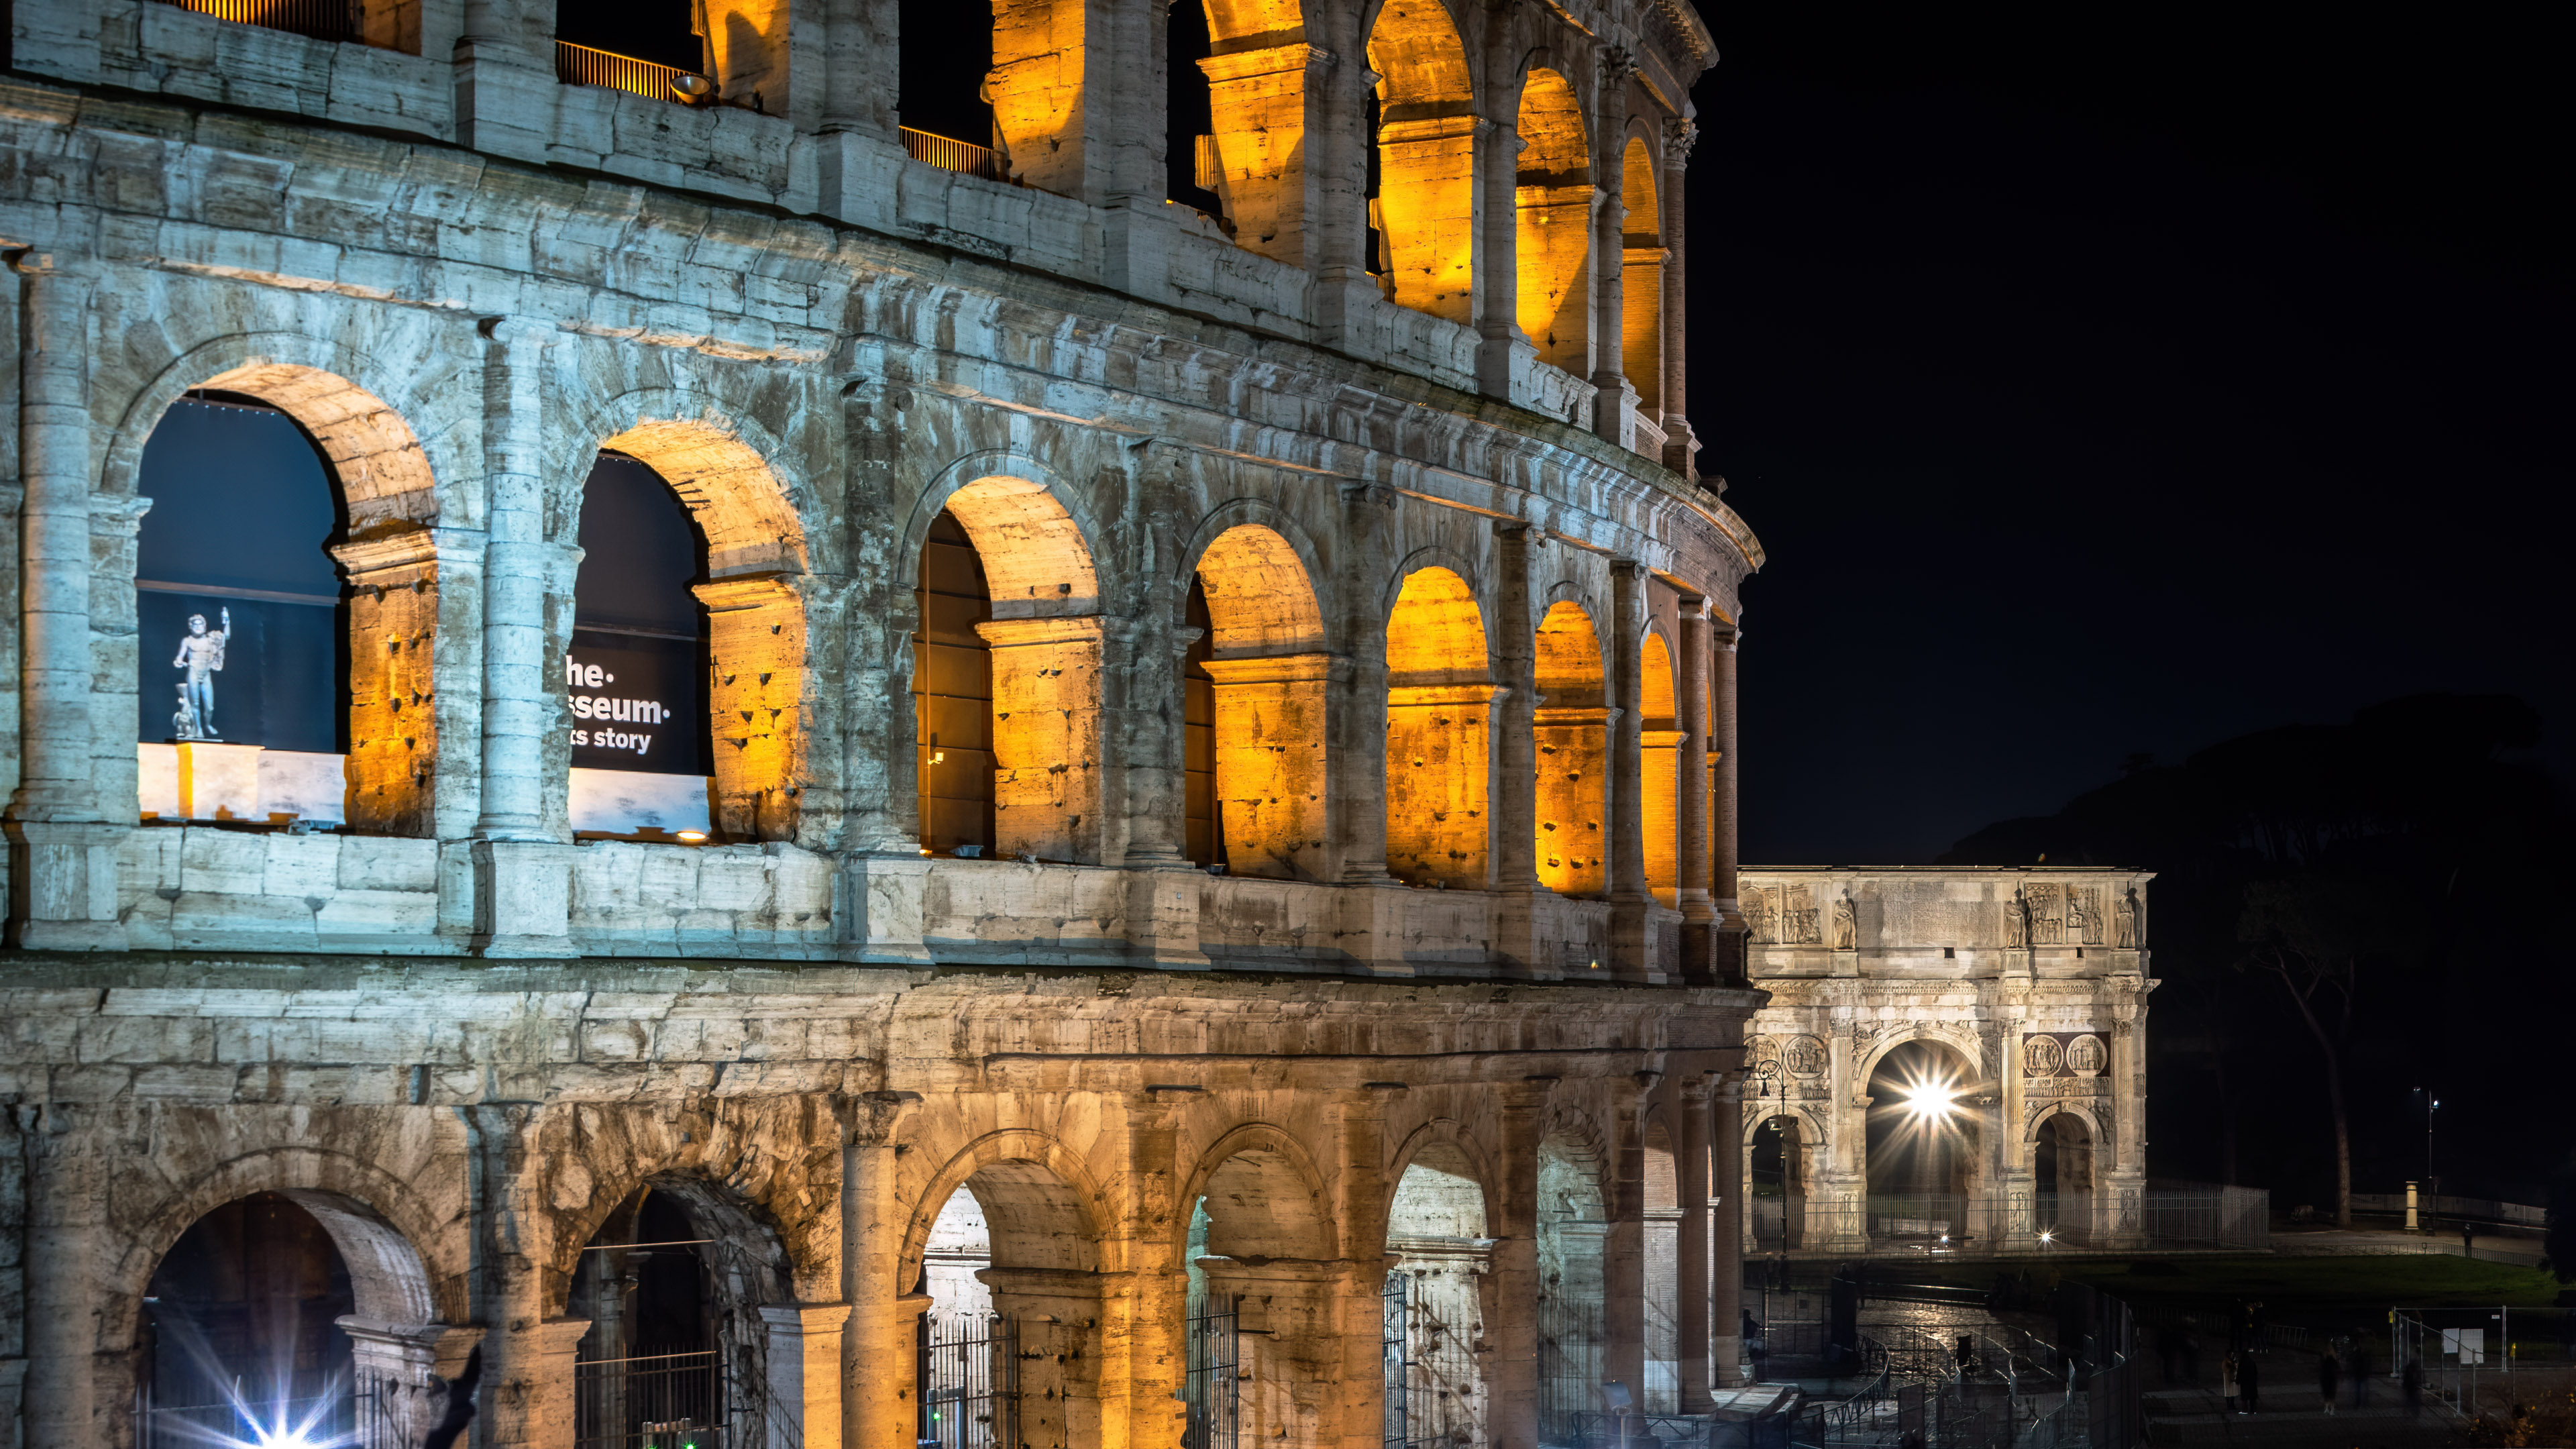 Experience the stunning Rome Colosseum night view wallpaper on your device